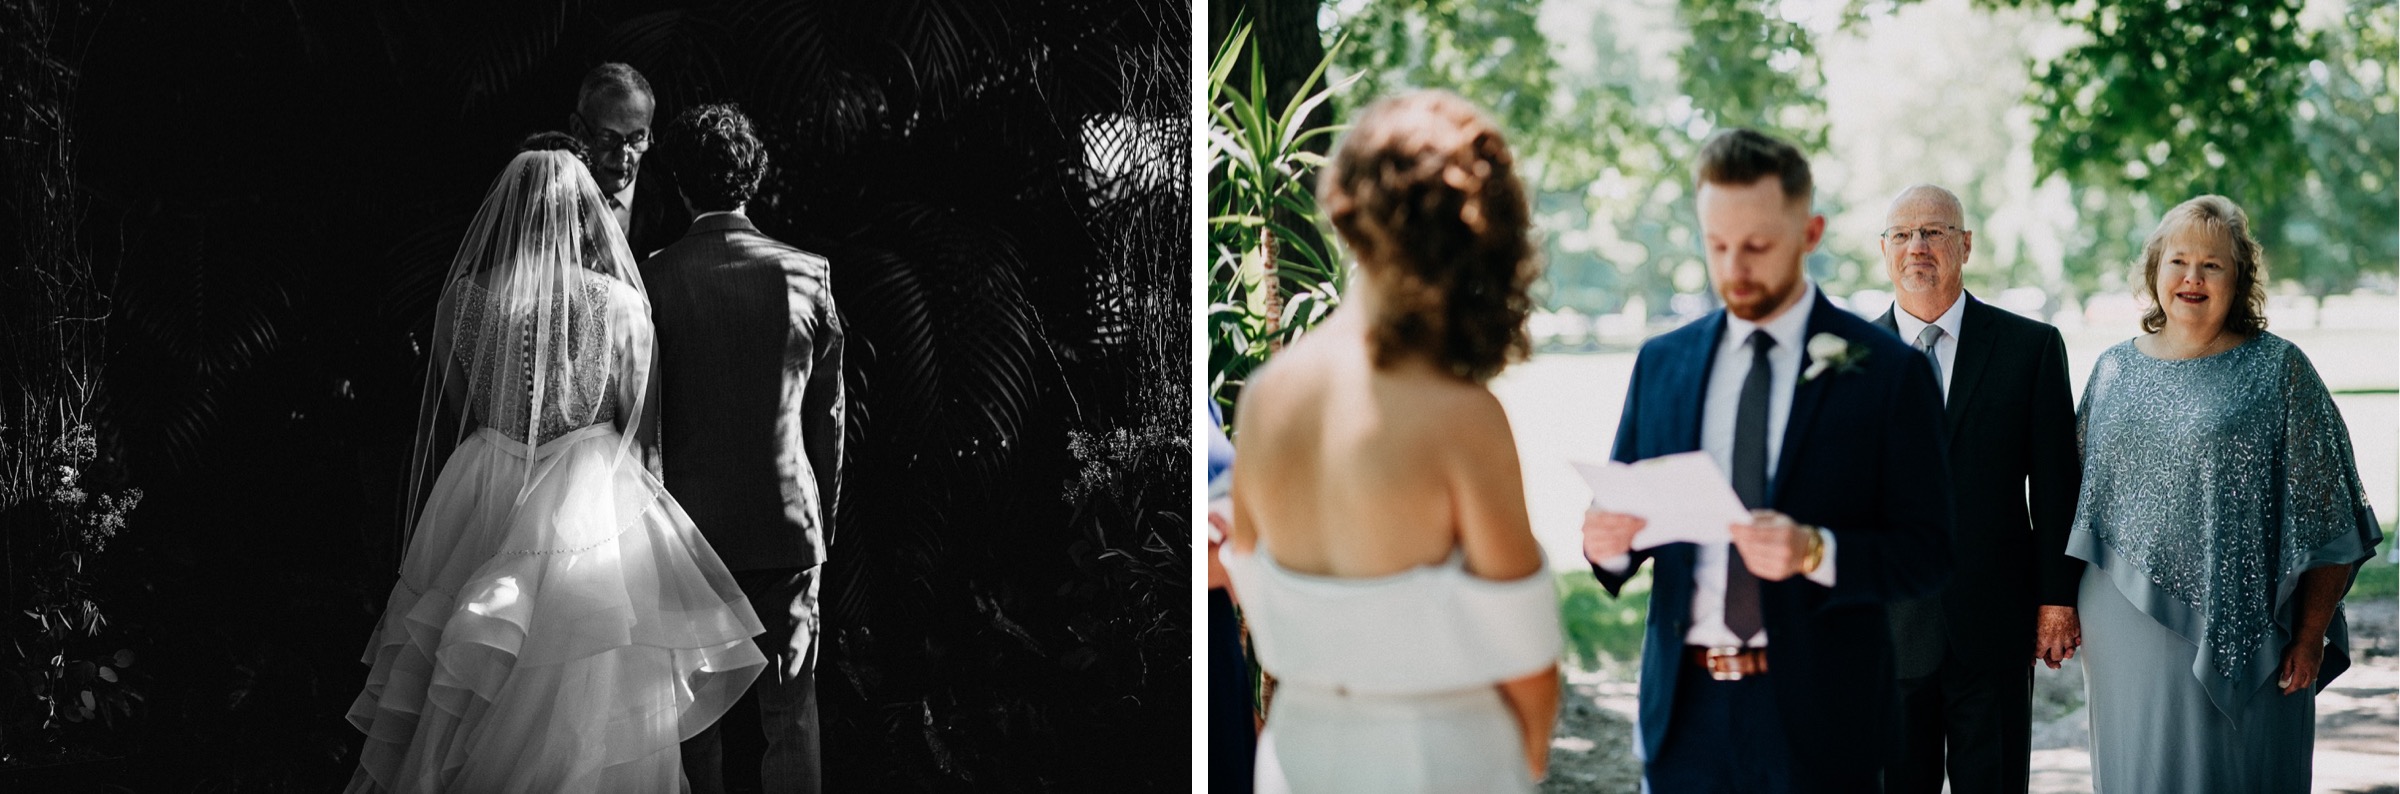 Dramatic light filters through the back of a bride's dress as she stands at the front of the Jewel Box in Forest Park with her husband during the ceremony portion of their wedding day timeline